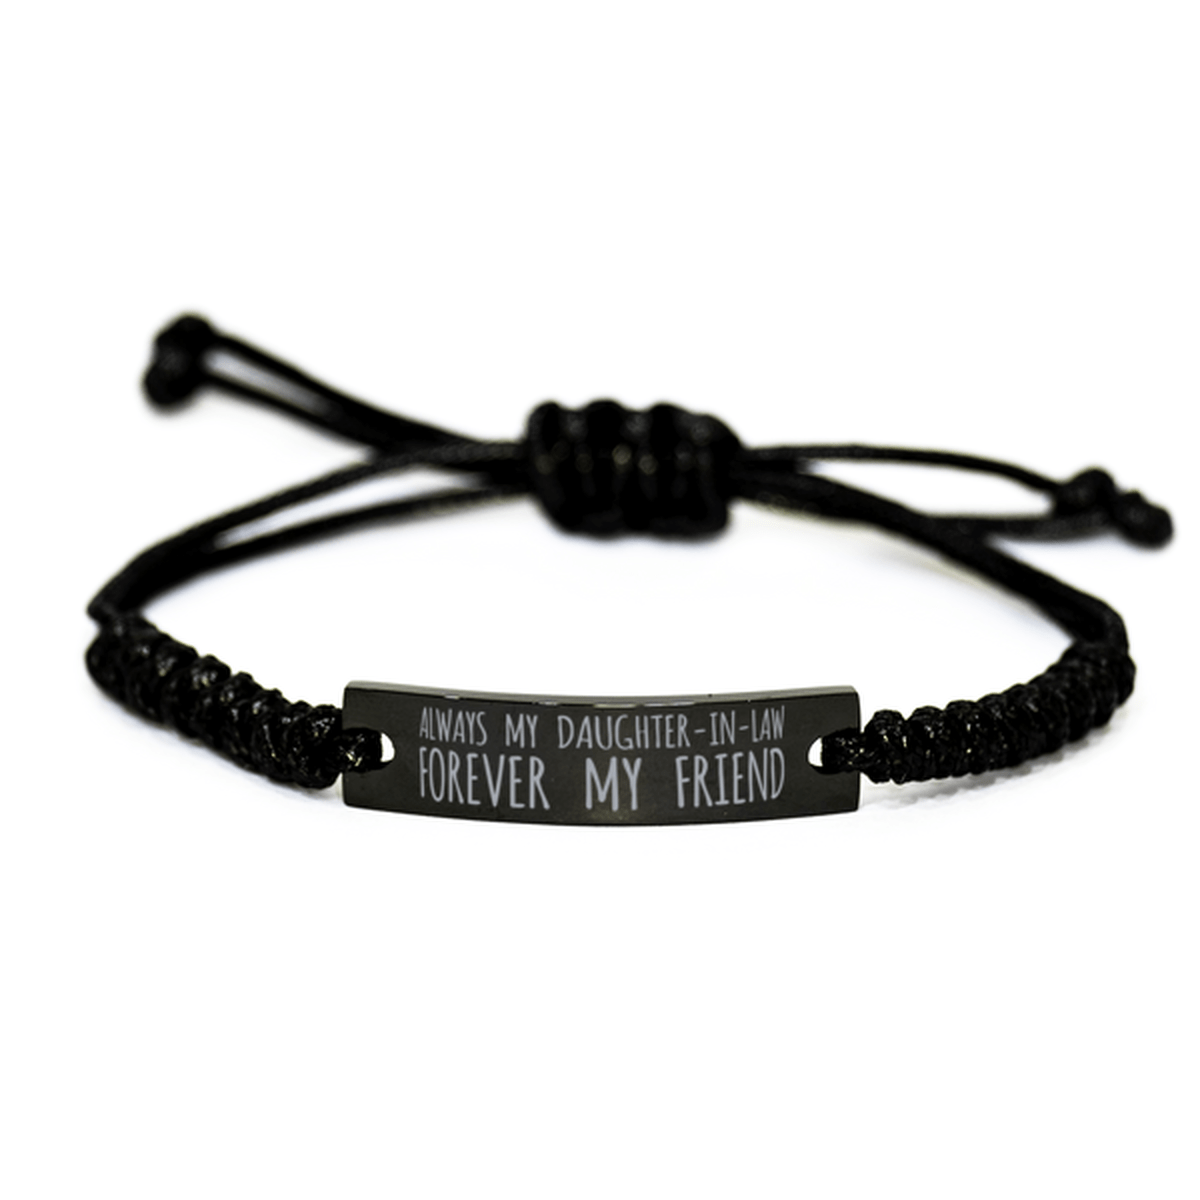 Inspirational Daughter-In-Law Black Rope Bracelet, Always My Daughter-In-Law Forever My Friend, Best Birthday Gifts For Family